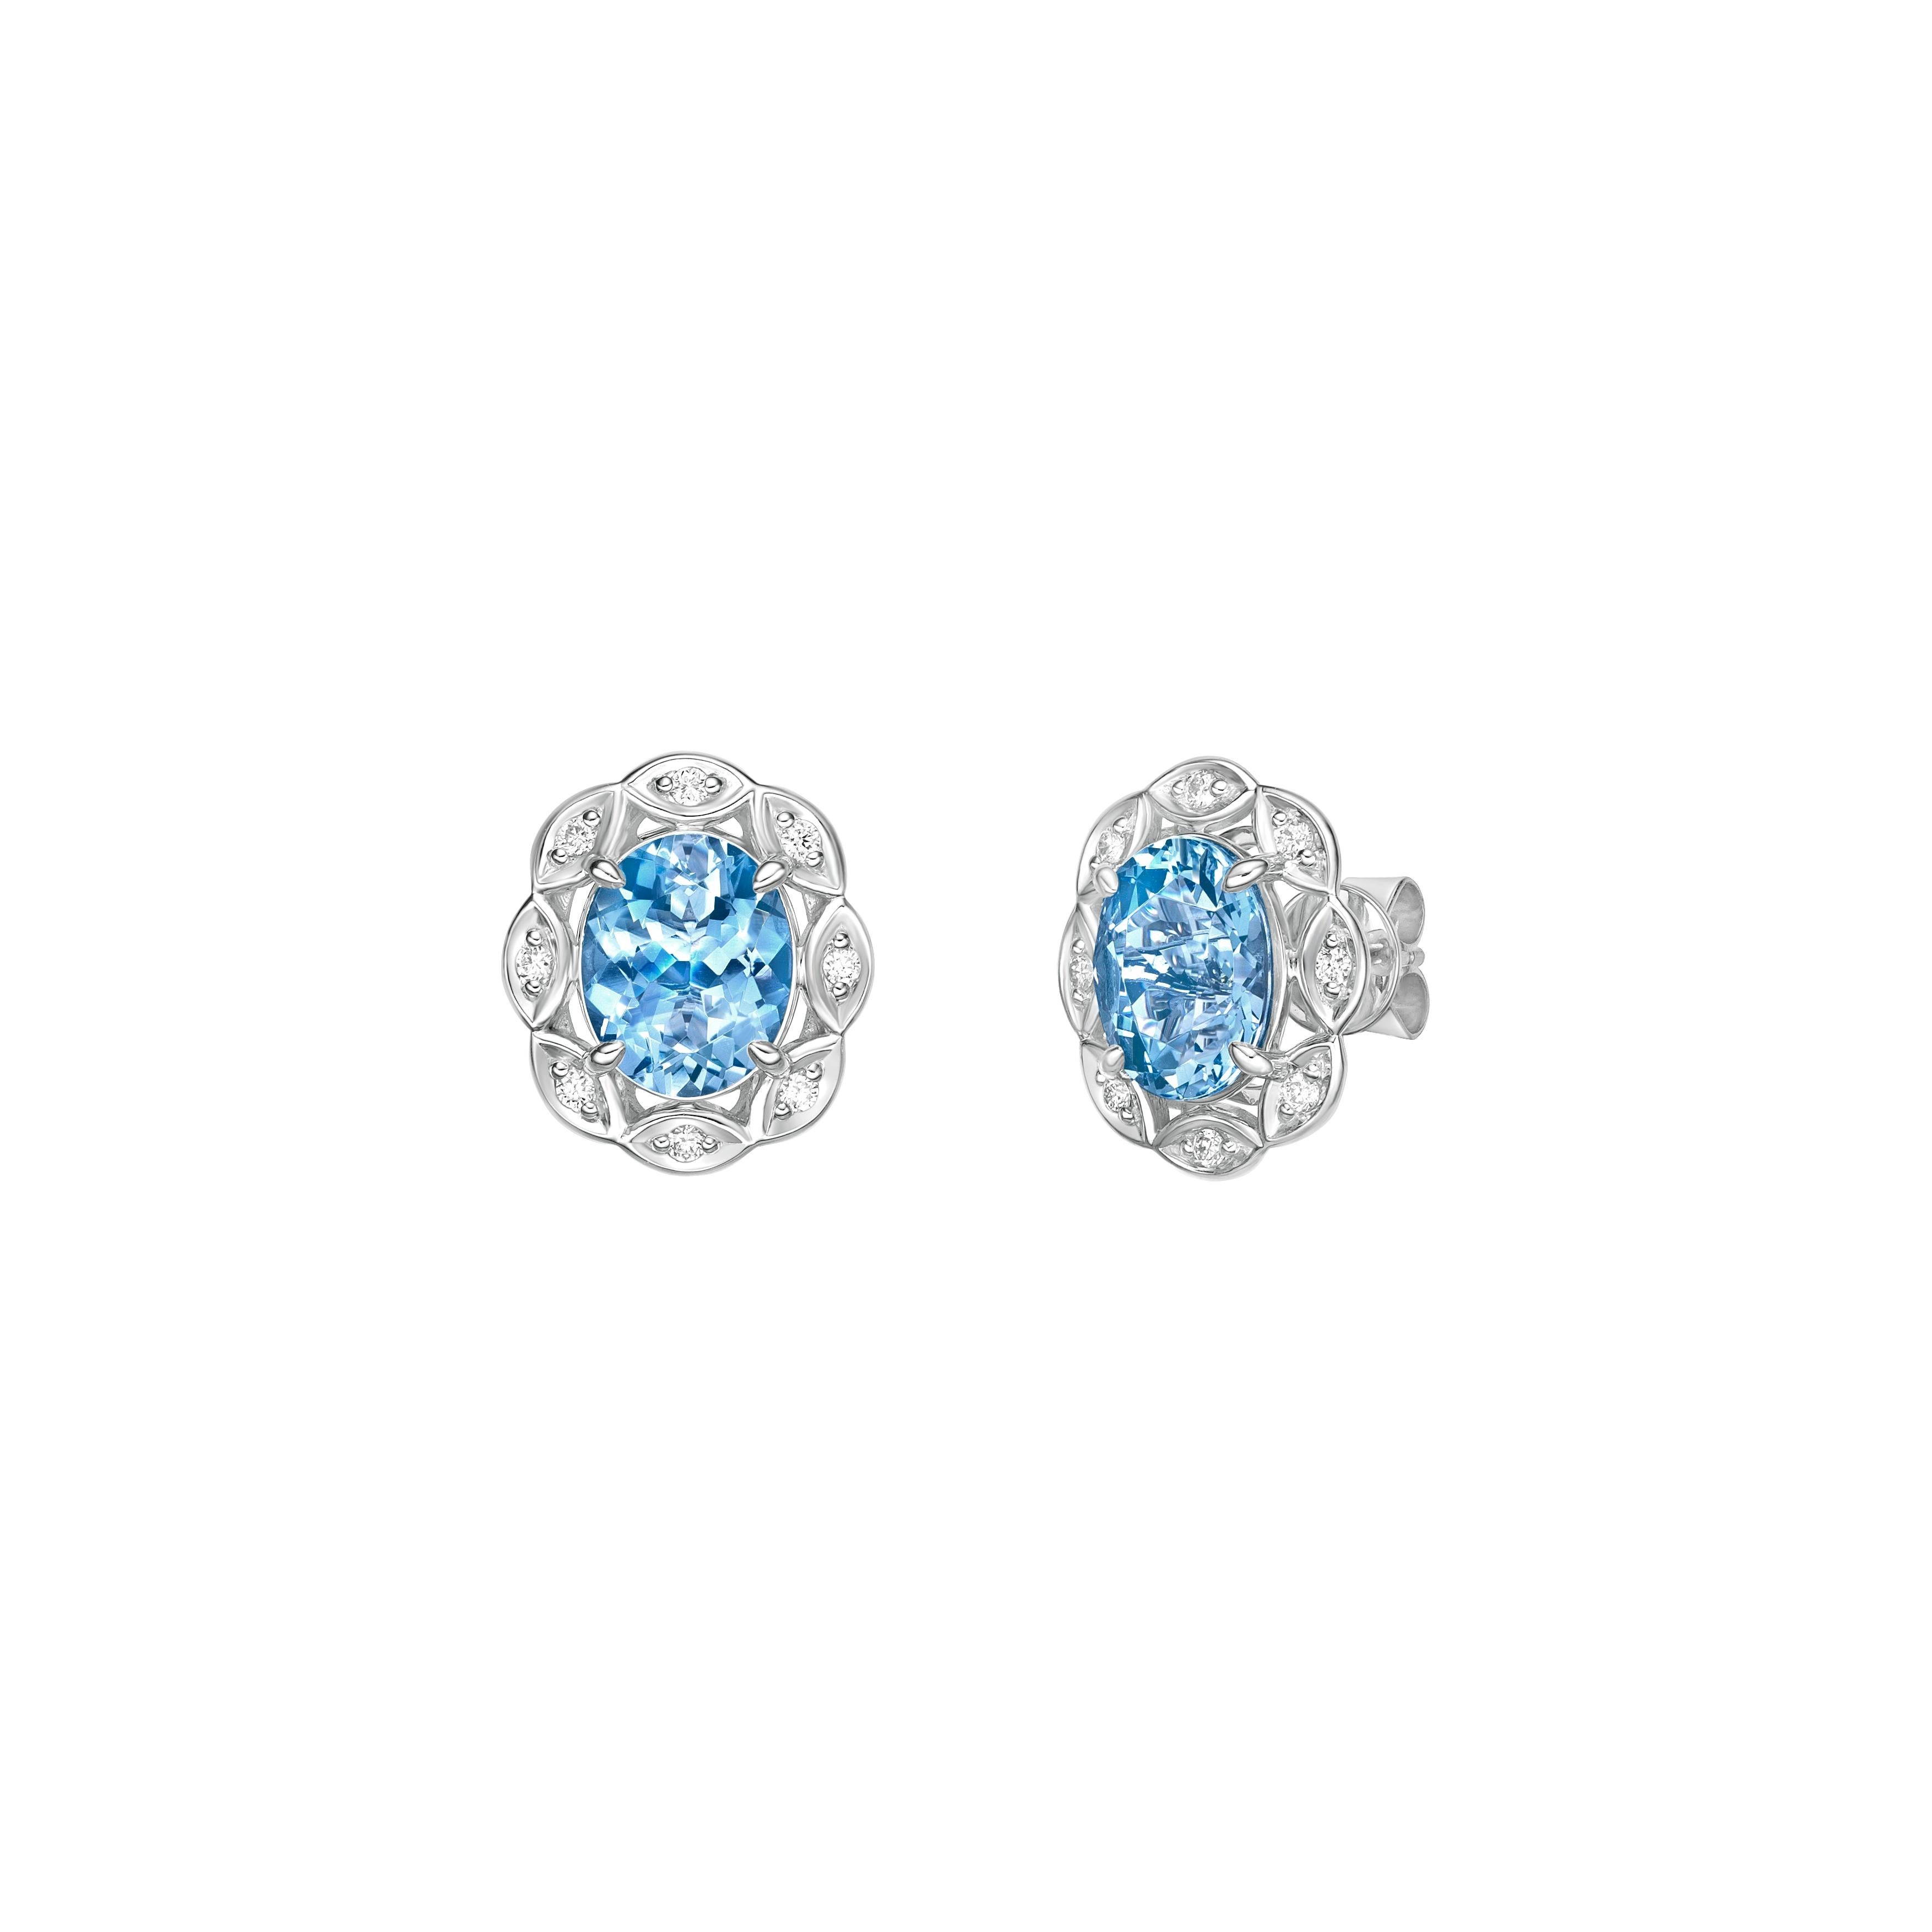 Oval Cut 4.618 Carat Aquamarine Stud Earrings in 18Karat White Gold with White Diamond. For Sale